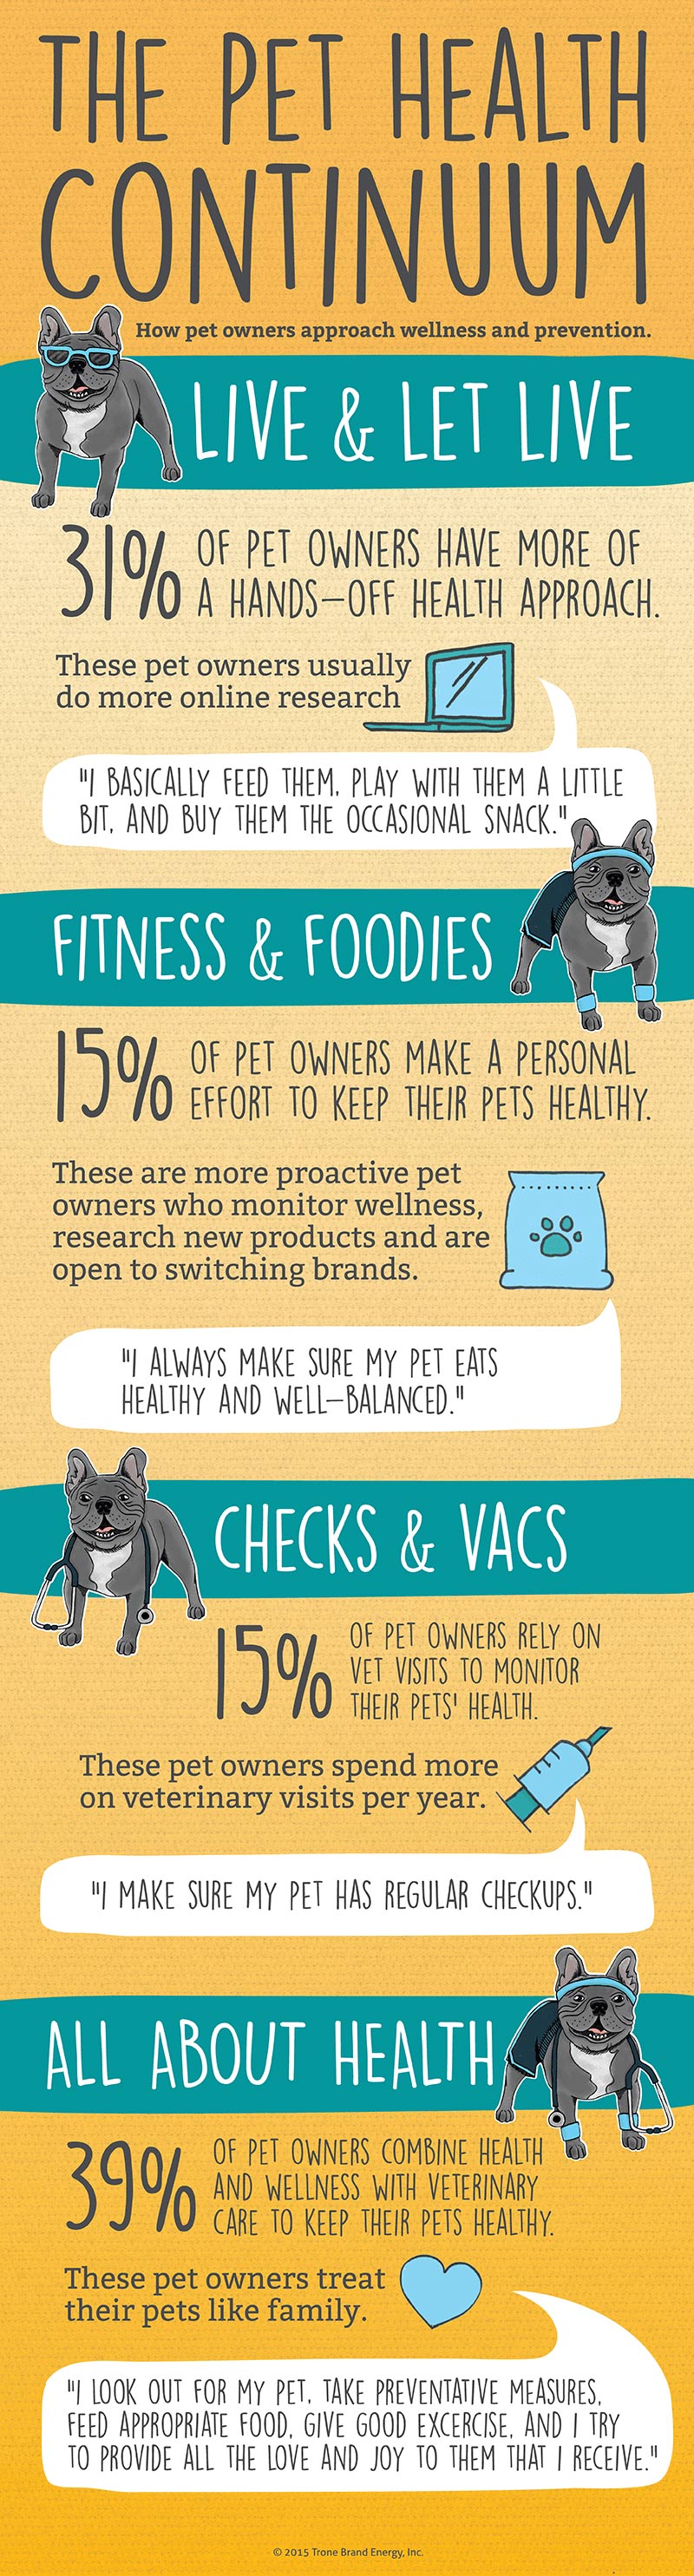 A Study in Pet Health | Trone Research